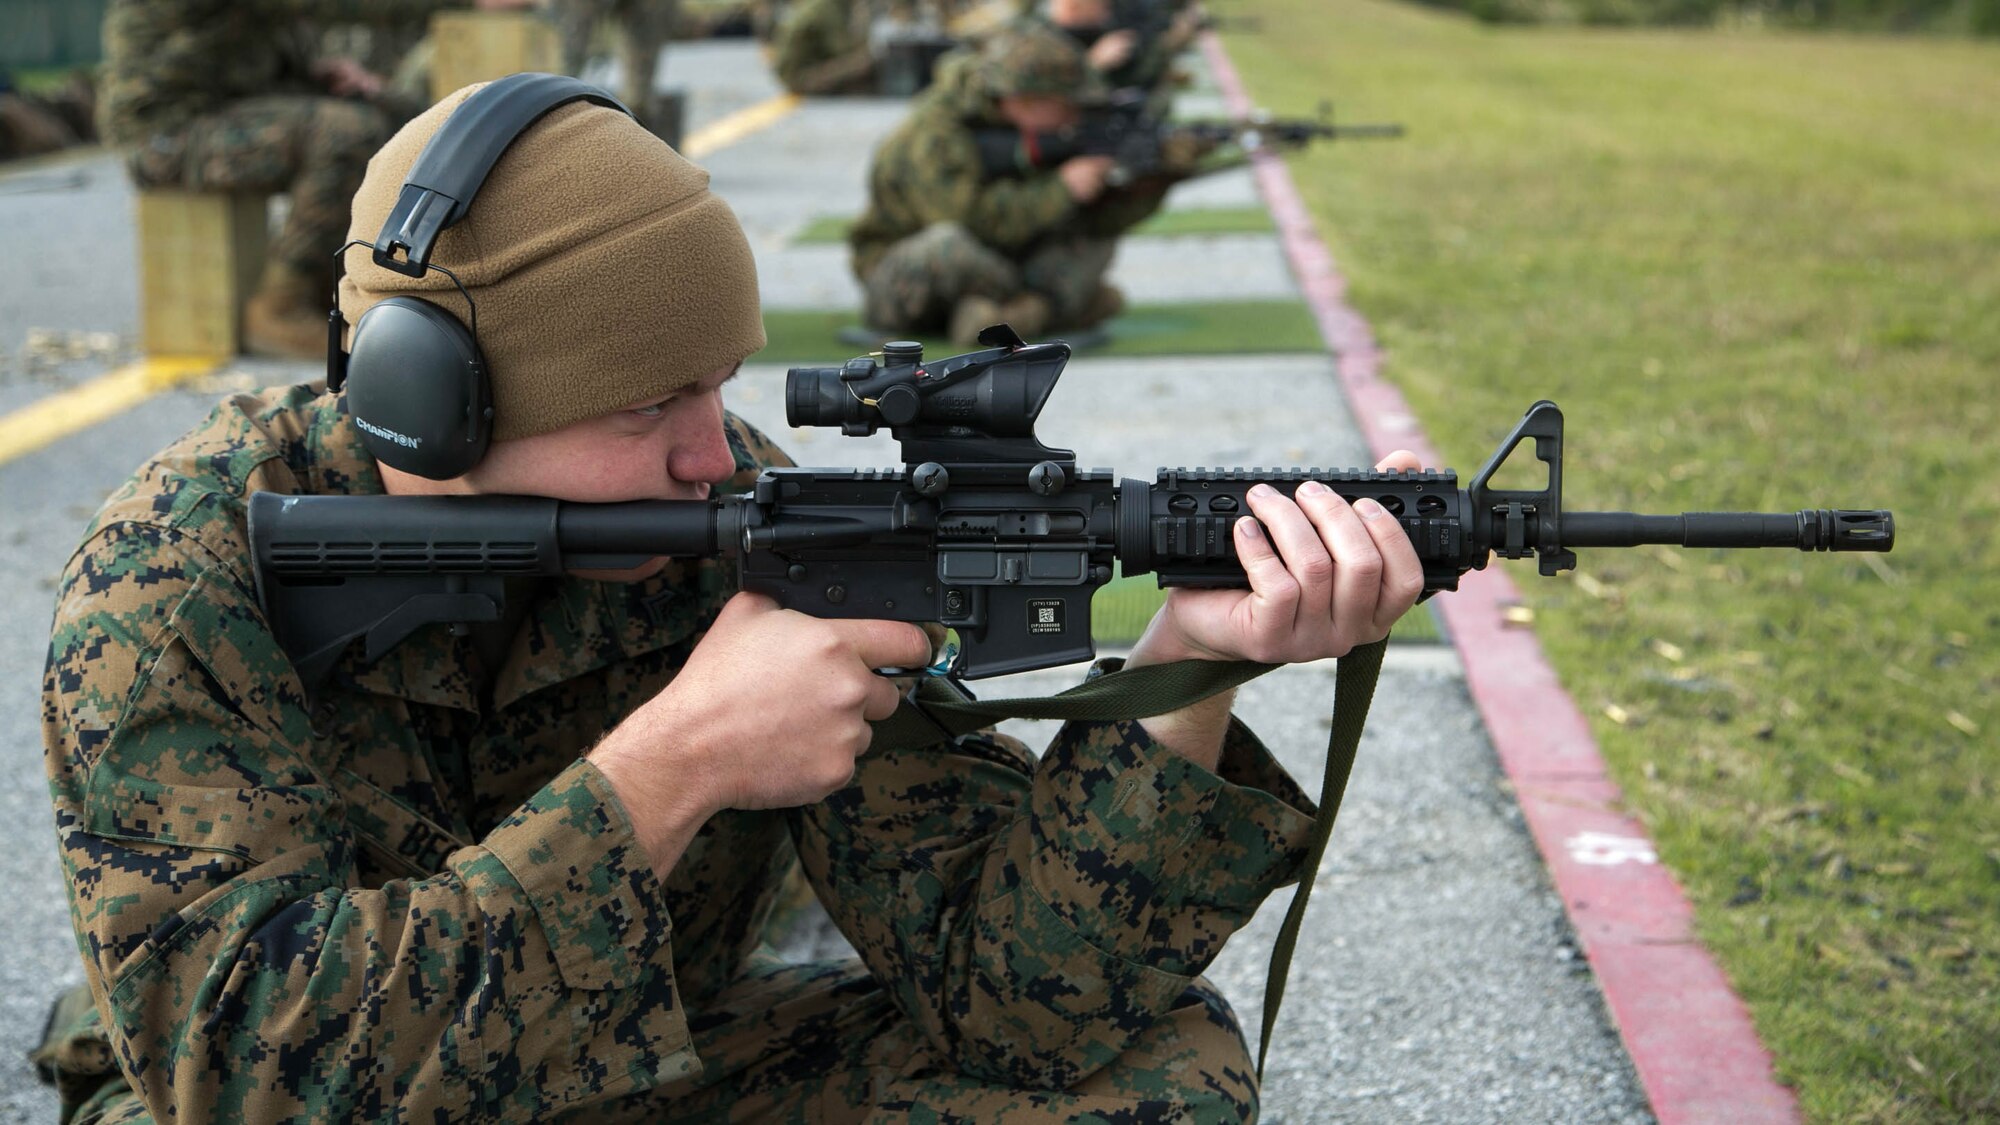 Cpl. James R. Beck, a Fixed-Wing Aircraft Power Plants Mechanic from Marine Corps Air Station Iwakuni, fires on his target during the Far East Division Marksmanship Match Dec. 17 aboard Camp Hansen, Okinawa, Japan. The shots were fired from various shooting positions and distances. Only Marines stationed throughout Japan competed in the match.